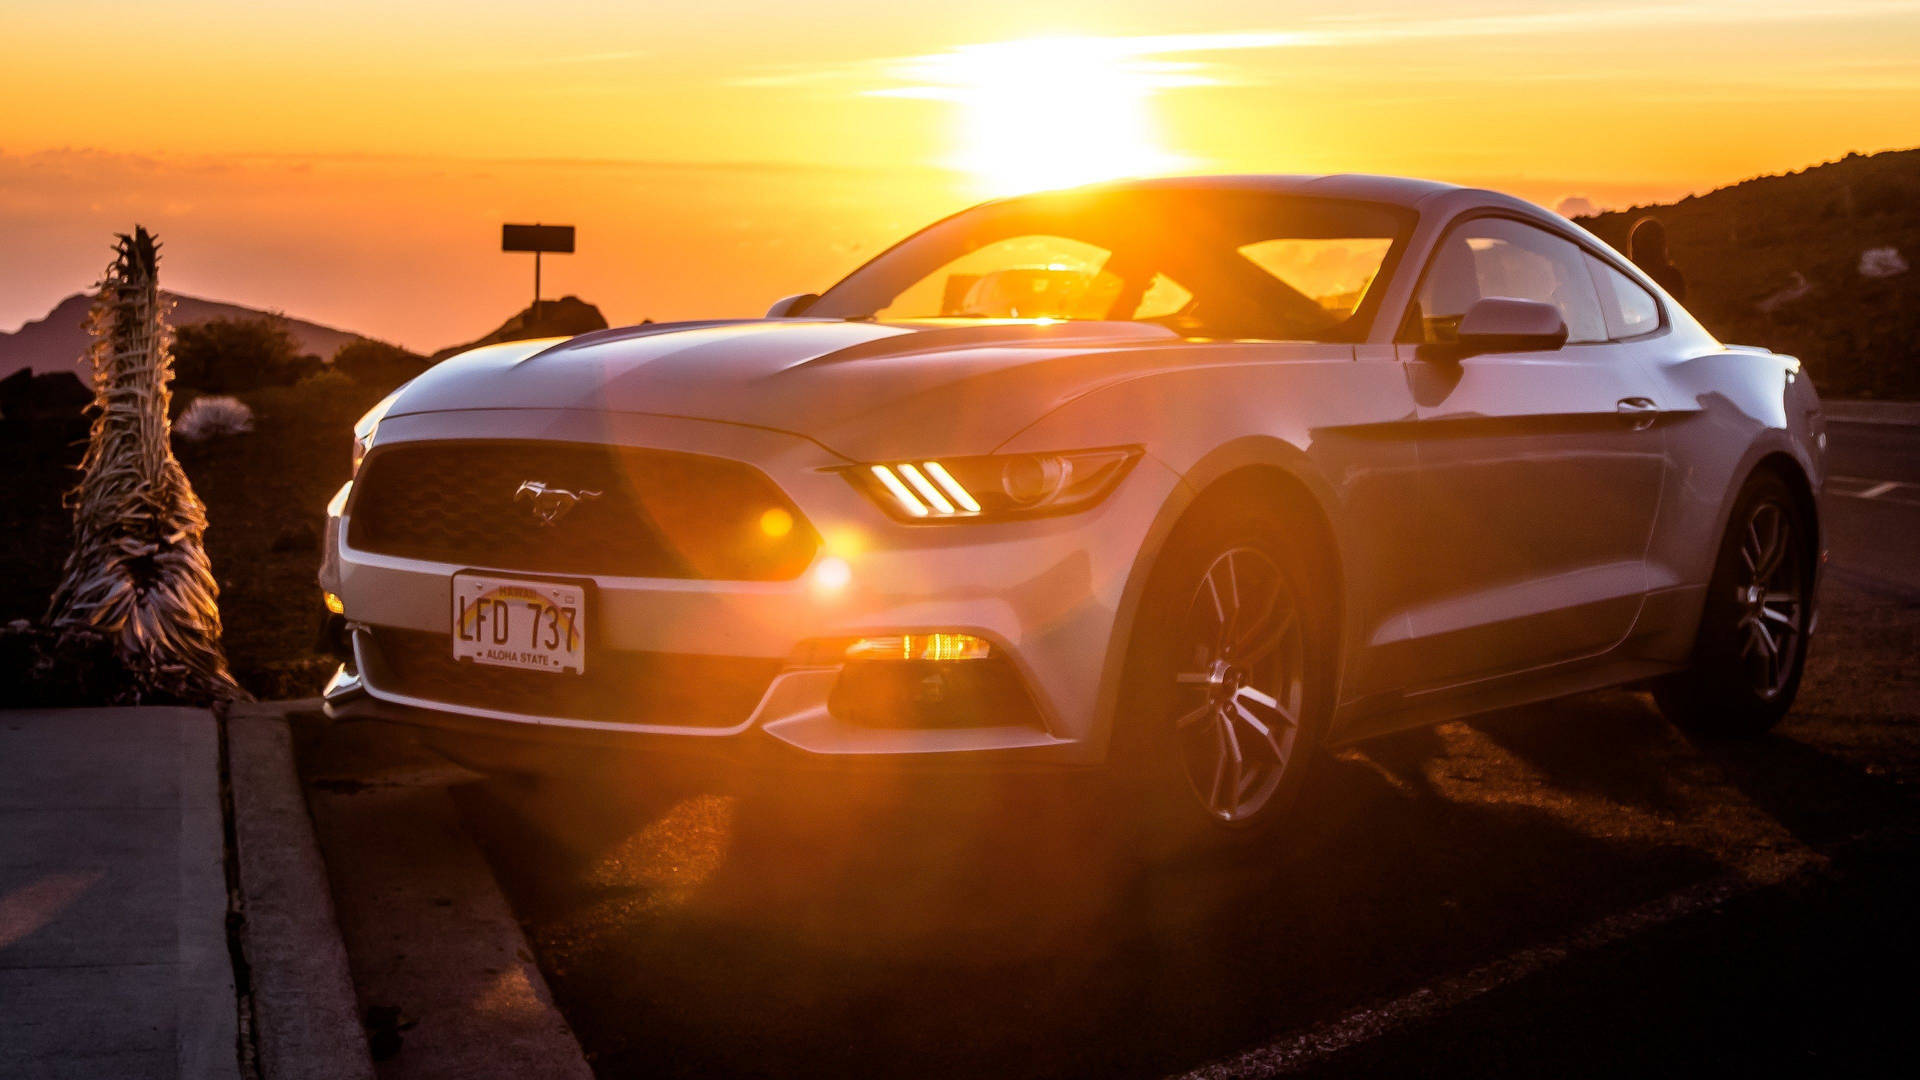 4k Ultra Hd Mustang With Sunset